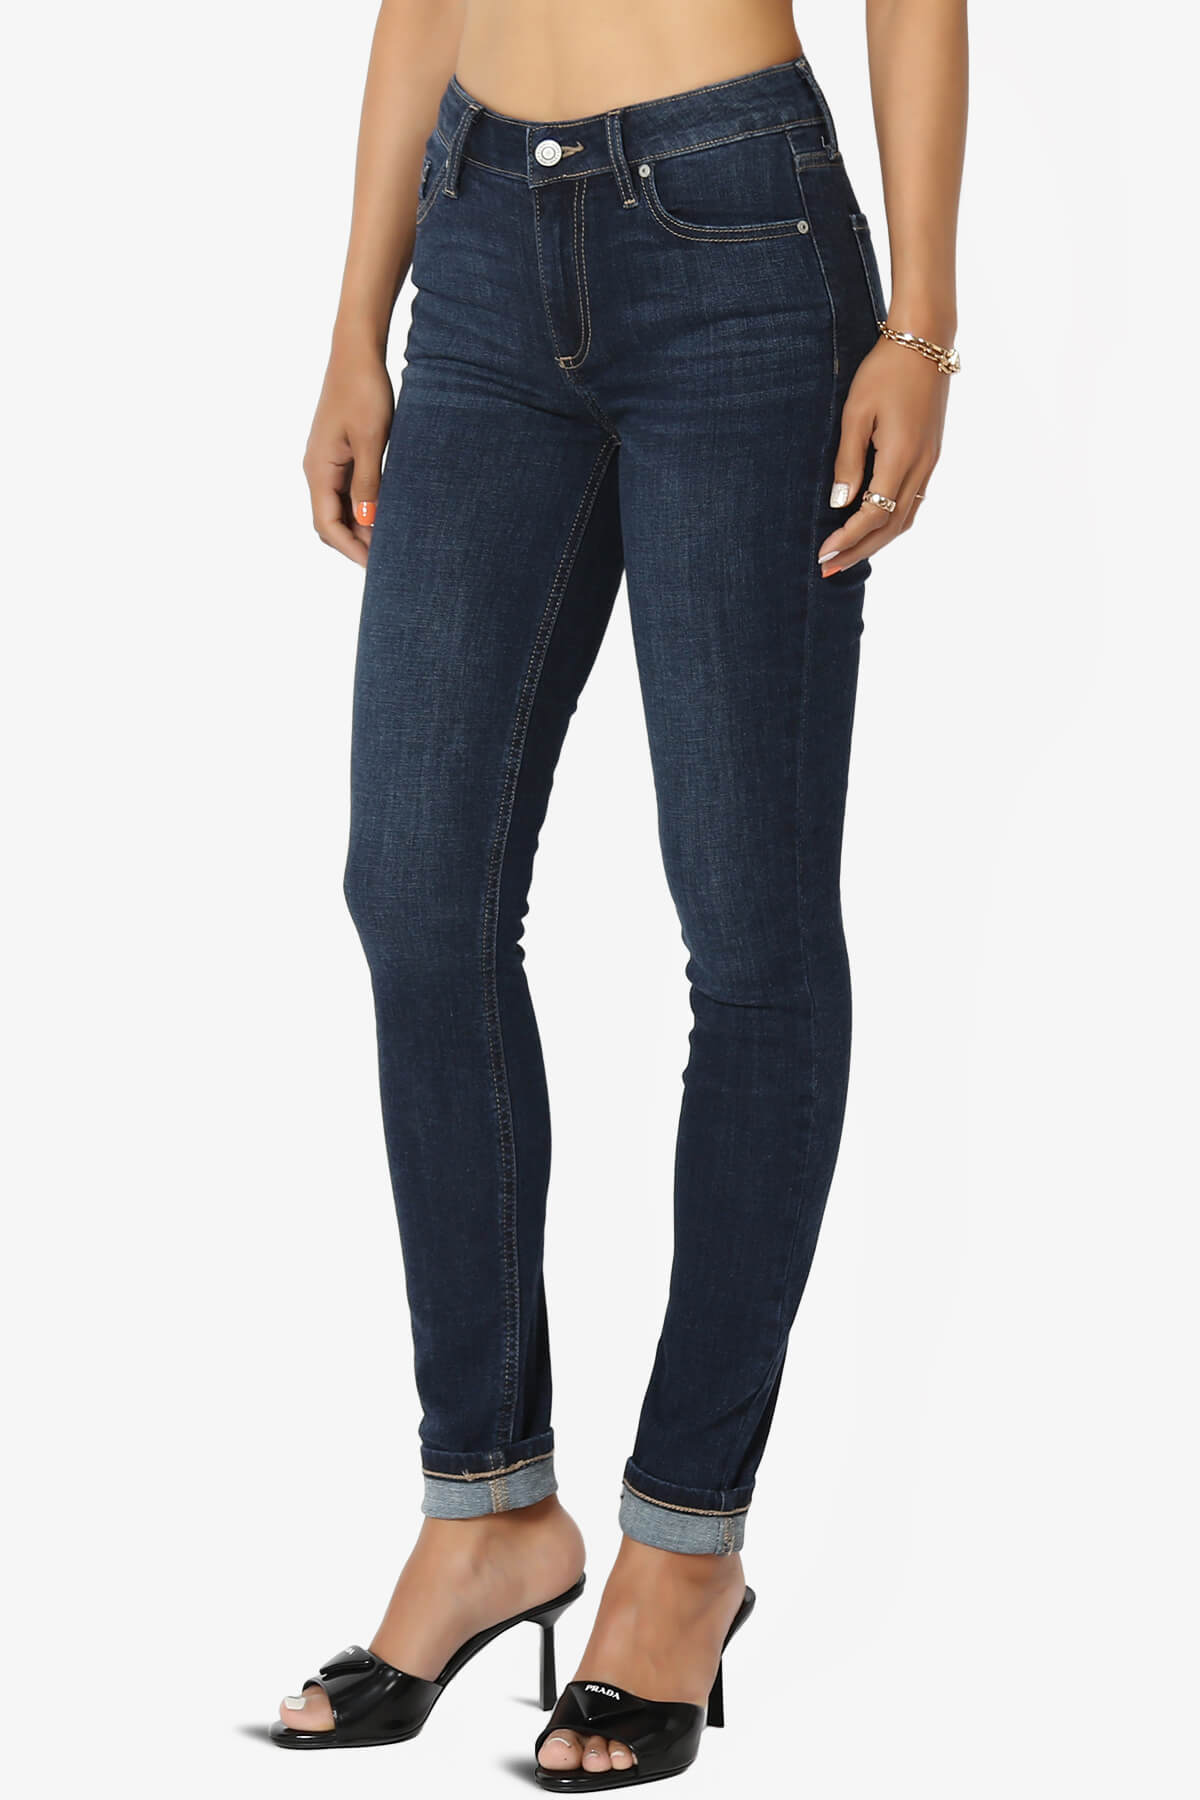 Jude Mid Rise Ankle Skinny Jeans in Bseat DARK_3